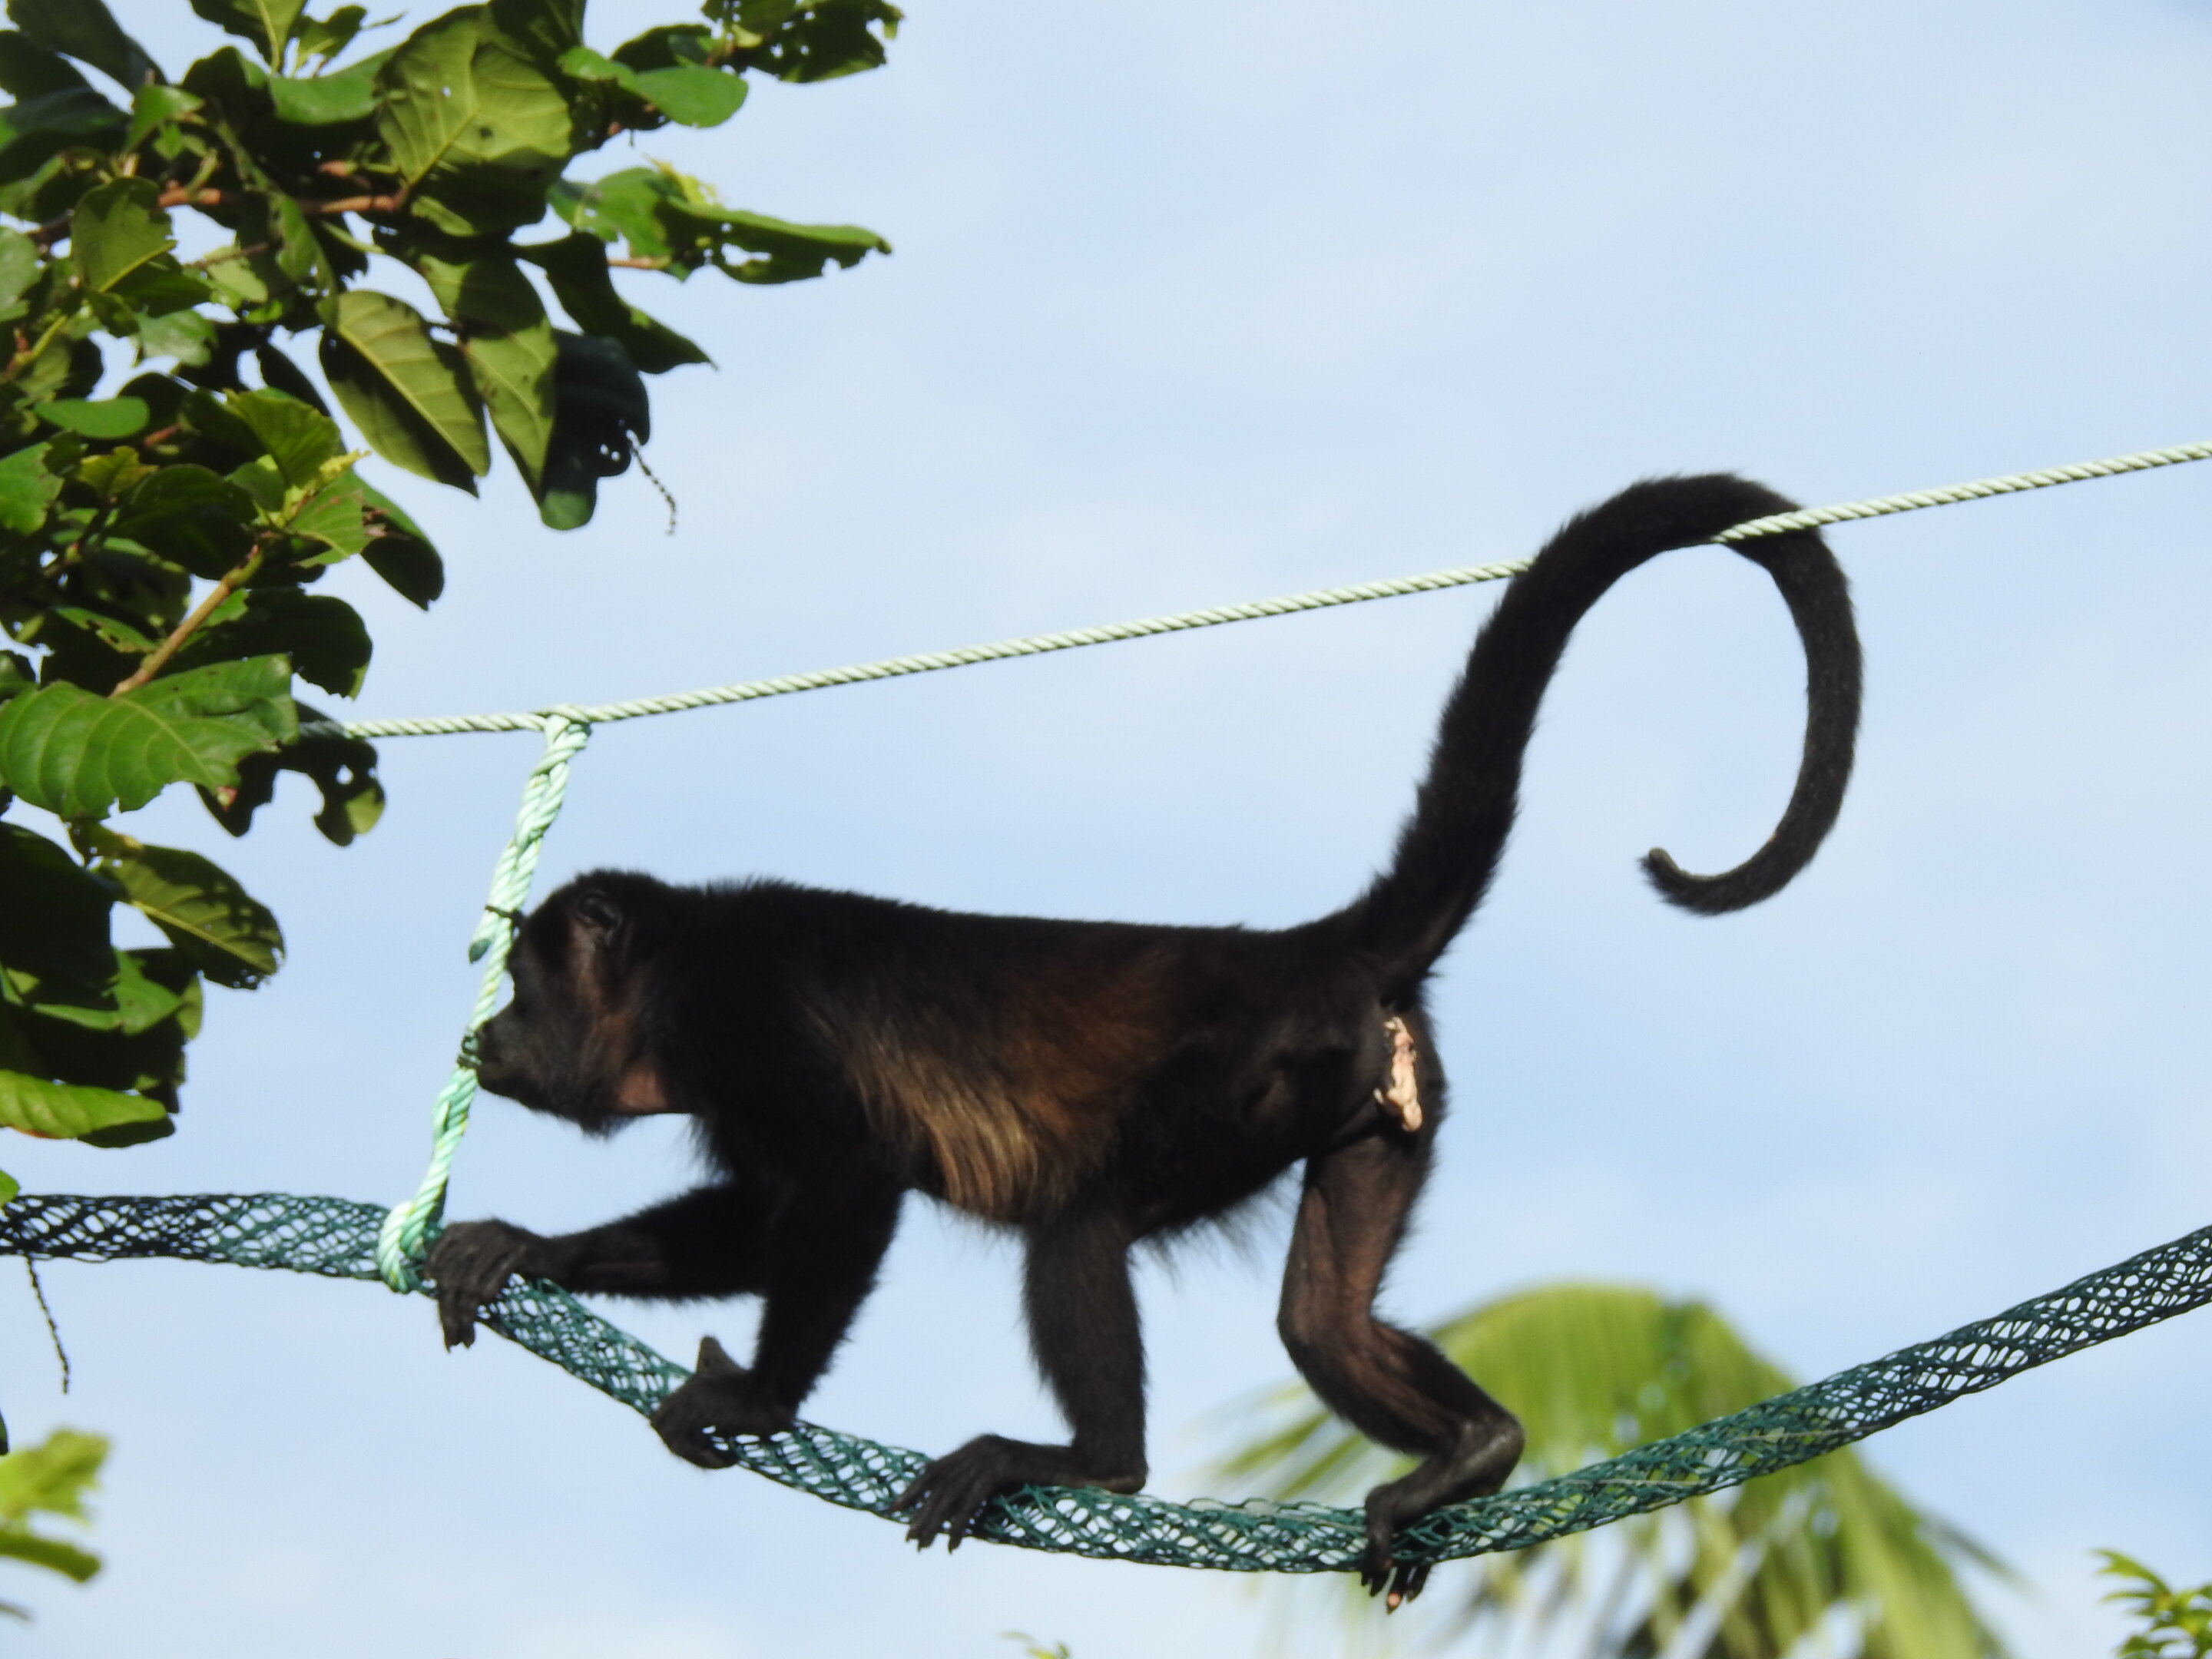 Canopy bridges key to habitat connectivity globally and arboreal animal  conservation: Case studies from around the world